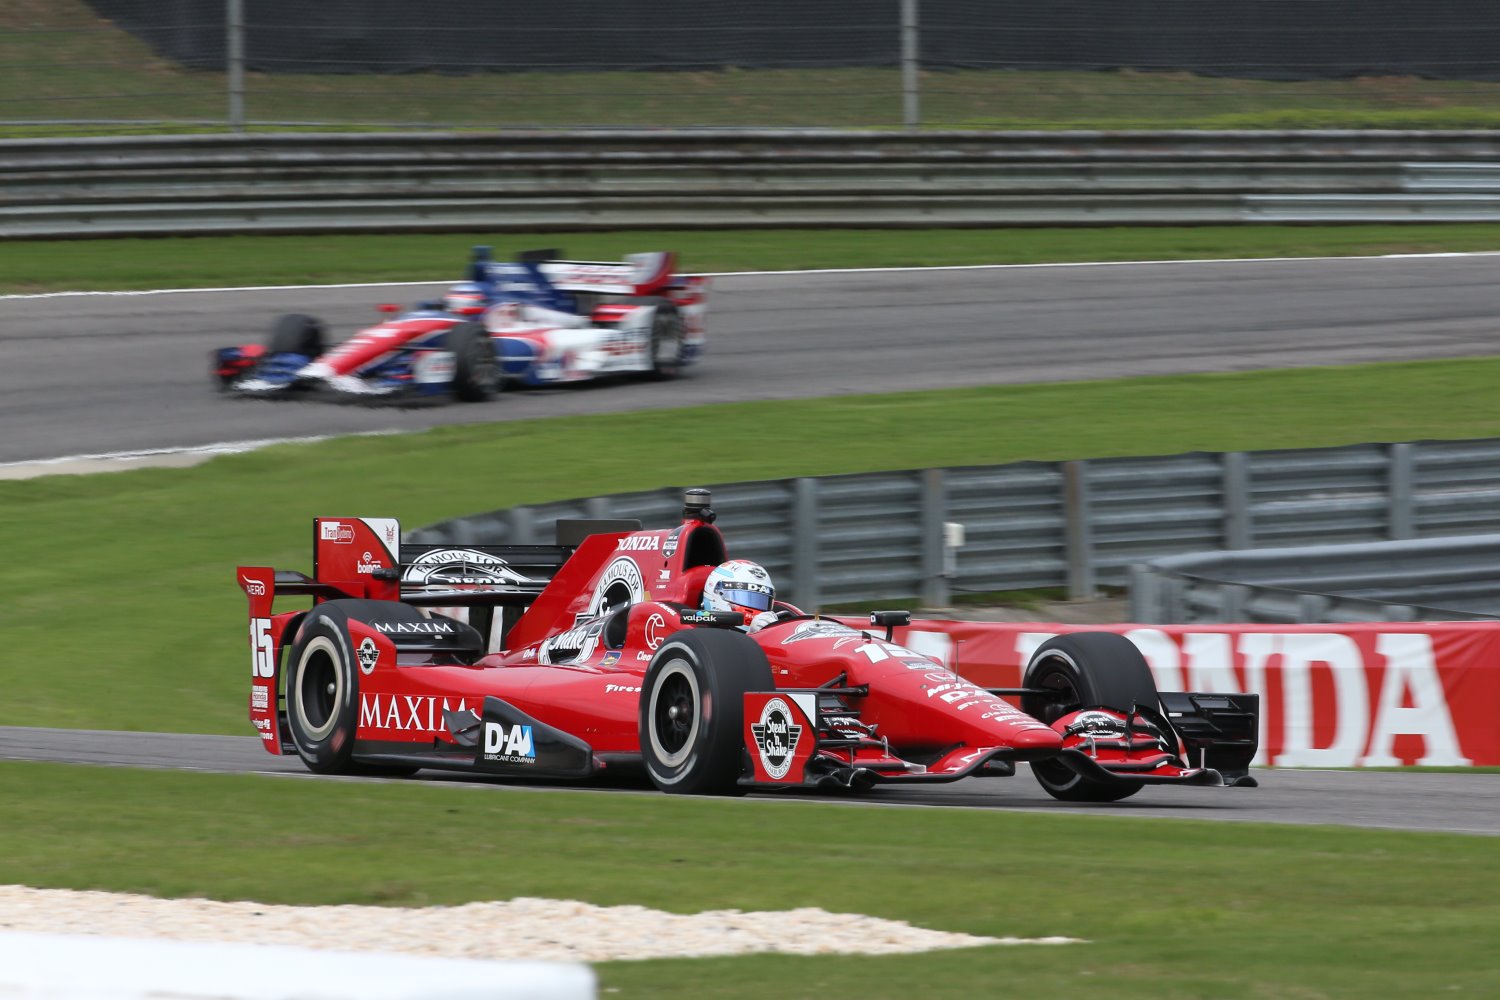 Rahal hopes to duplicate last year's strong result